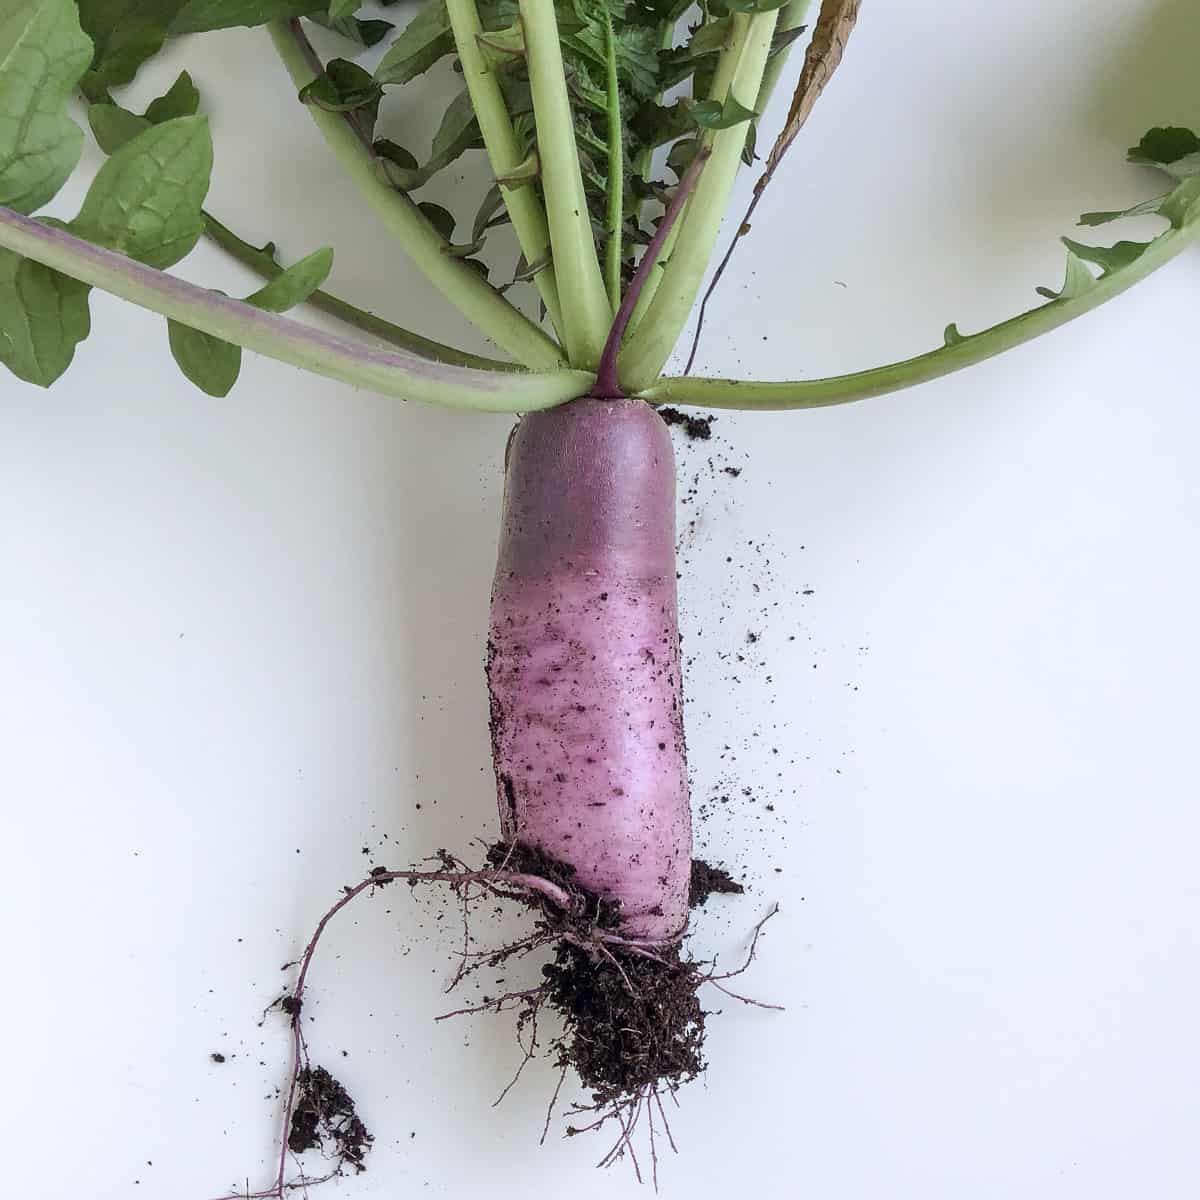 An image of a purple daikon still covered in the soil it was pulled from.